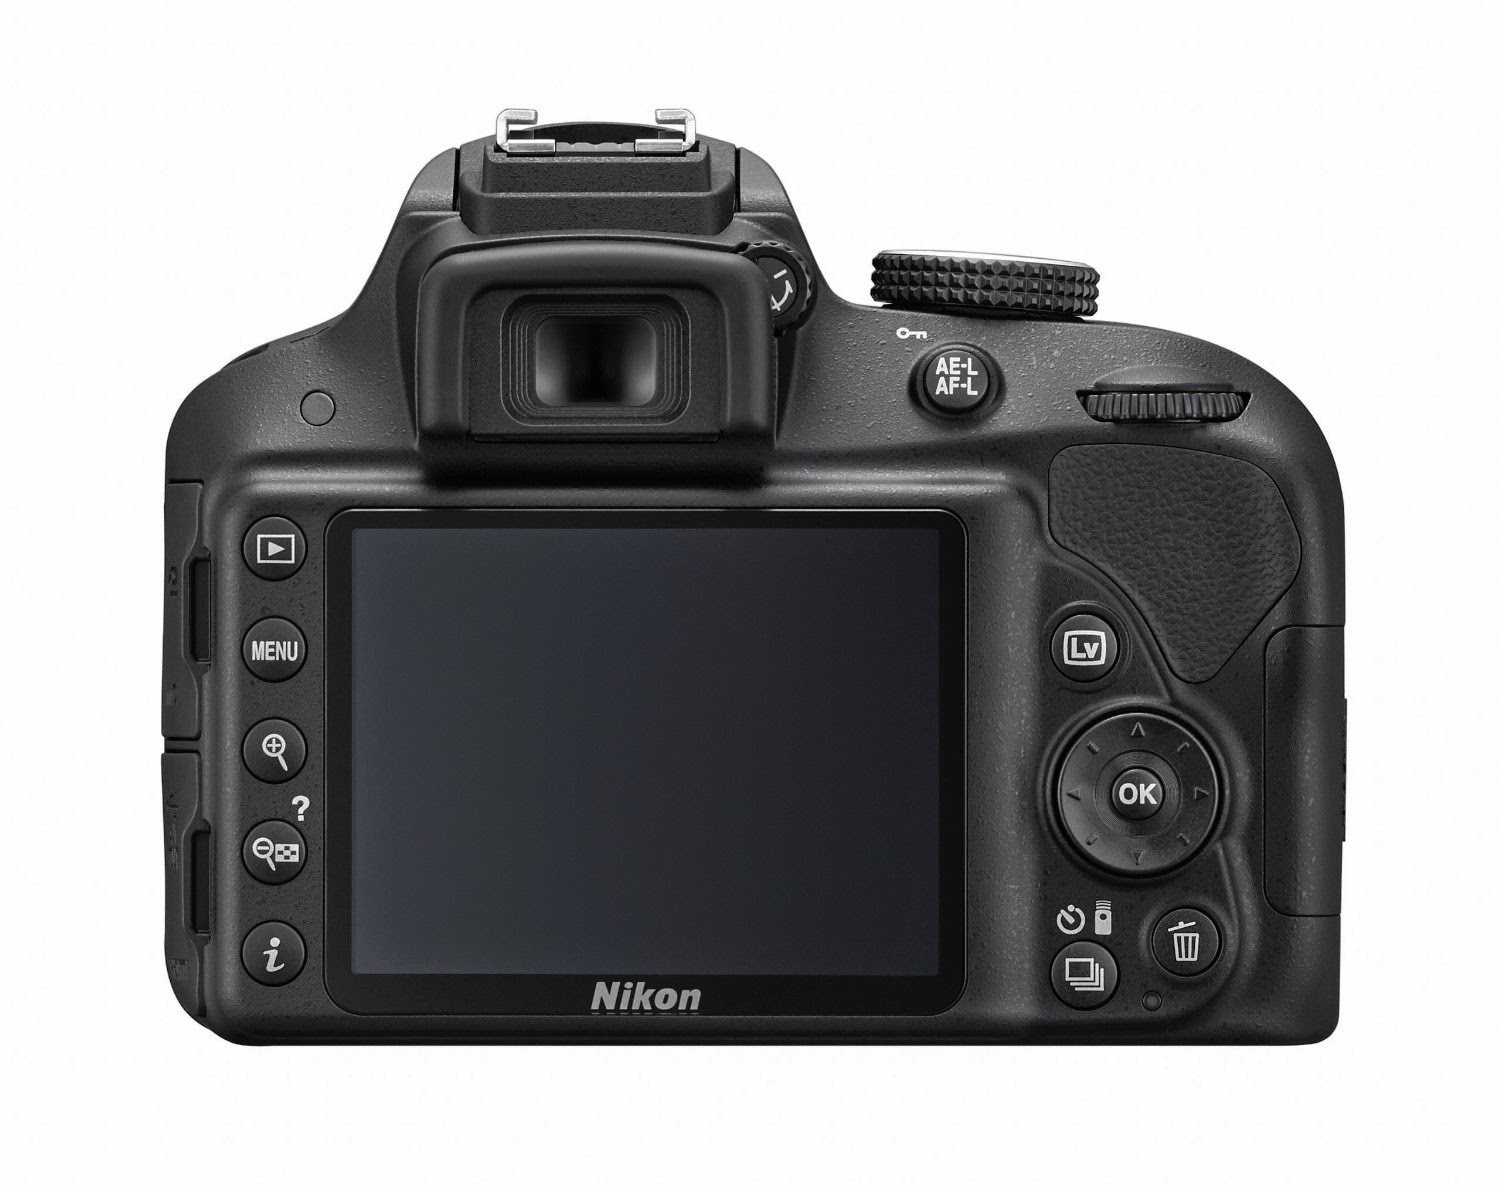 Nikon D3300 DSLR rear view with 3" LCD screen, viewfinder, and function buttons